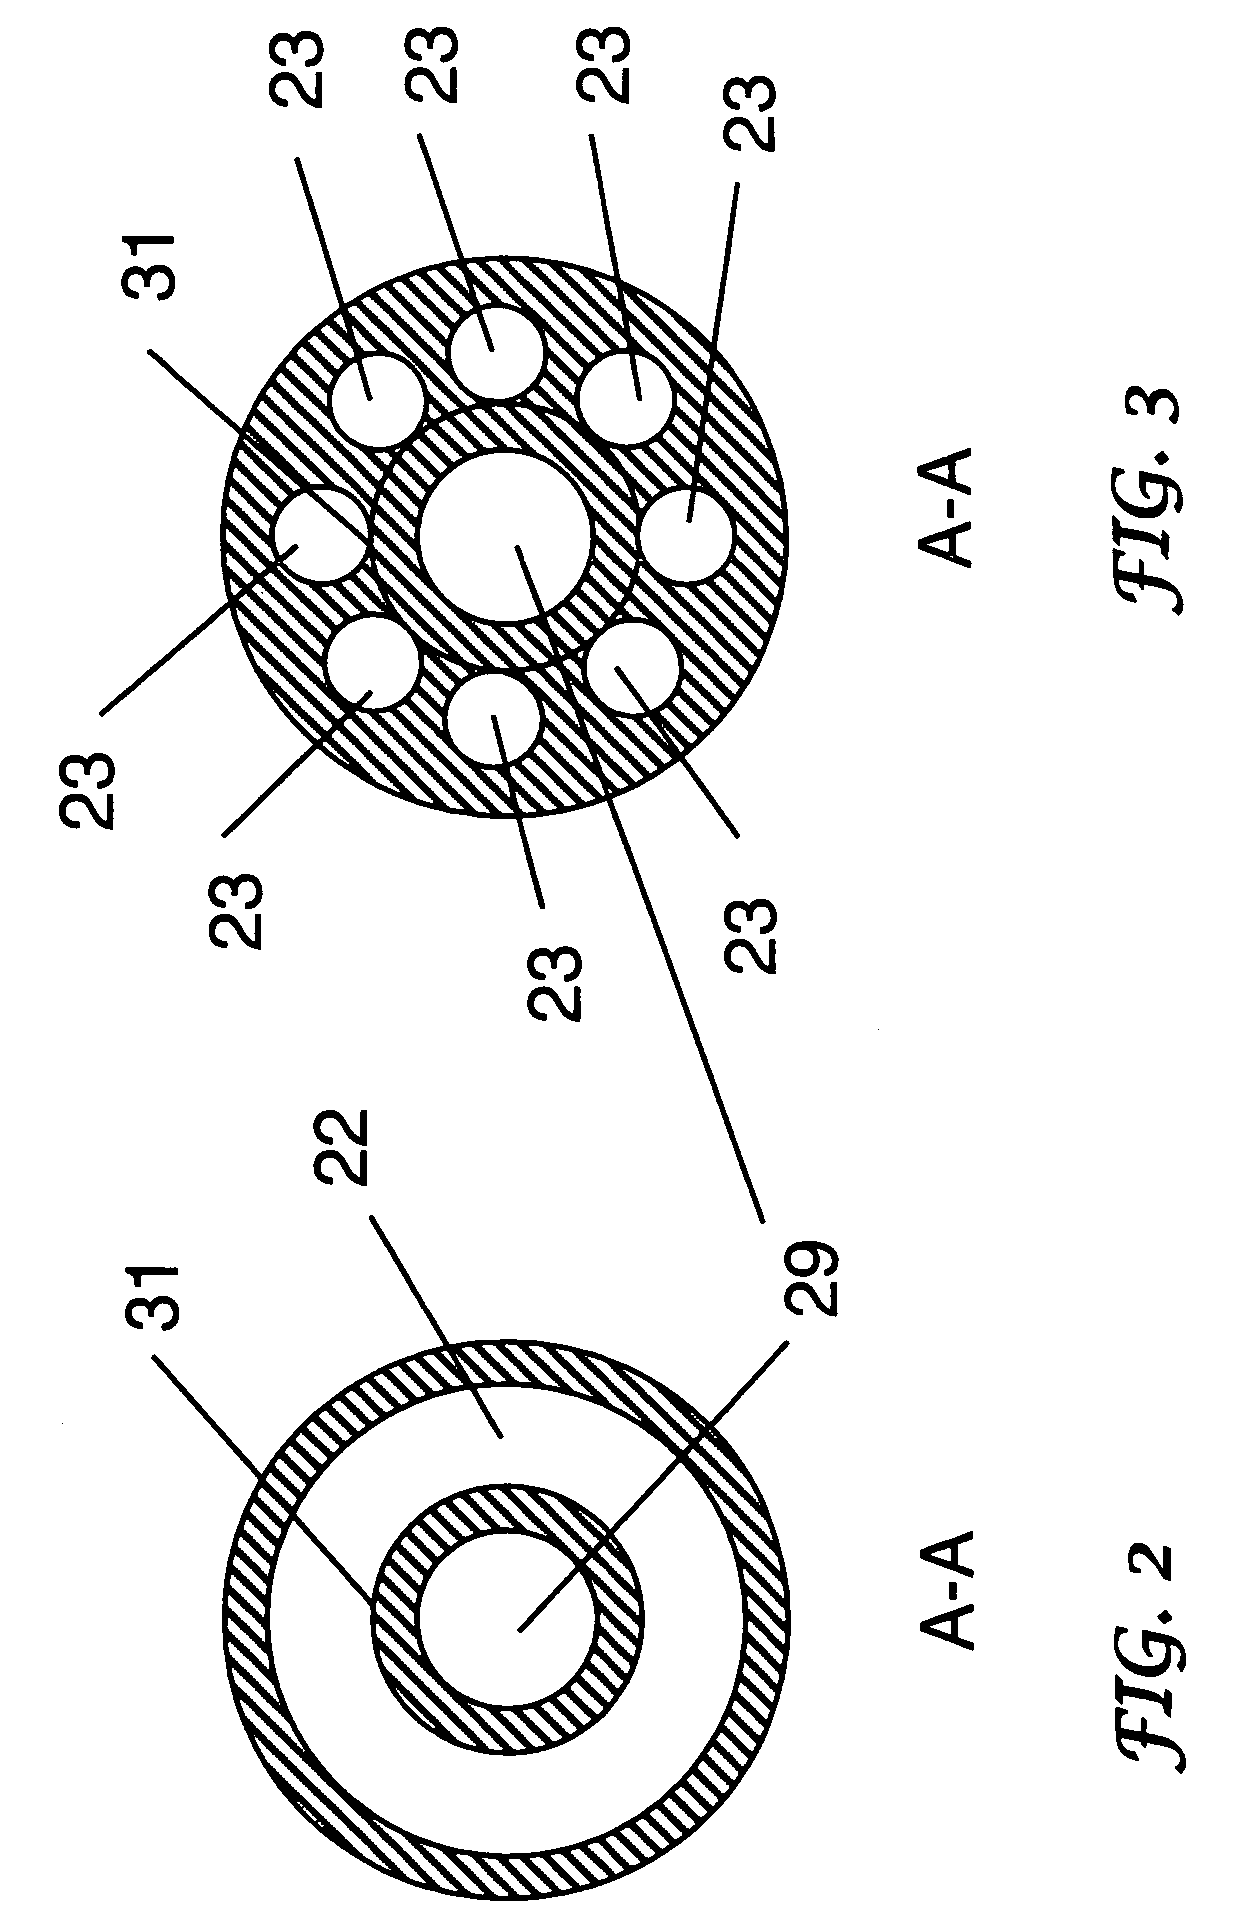 Emulsion atomizer nozzle, and burner, and method for oxy-fuel burner applications